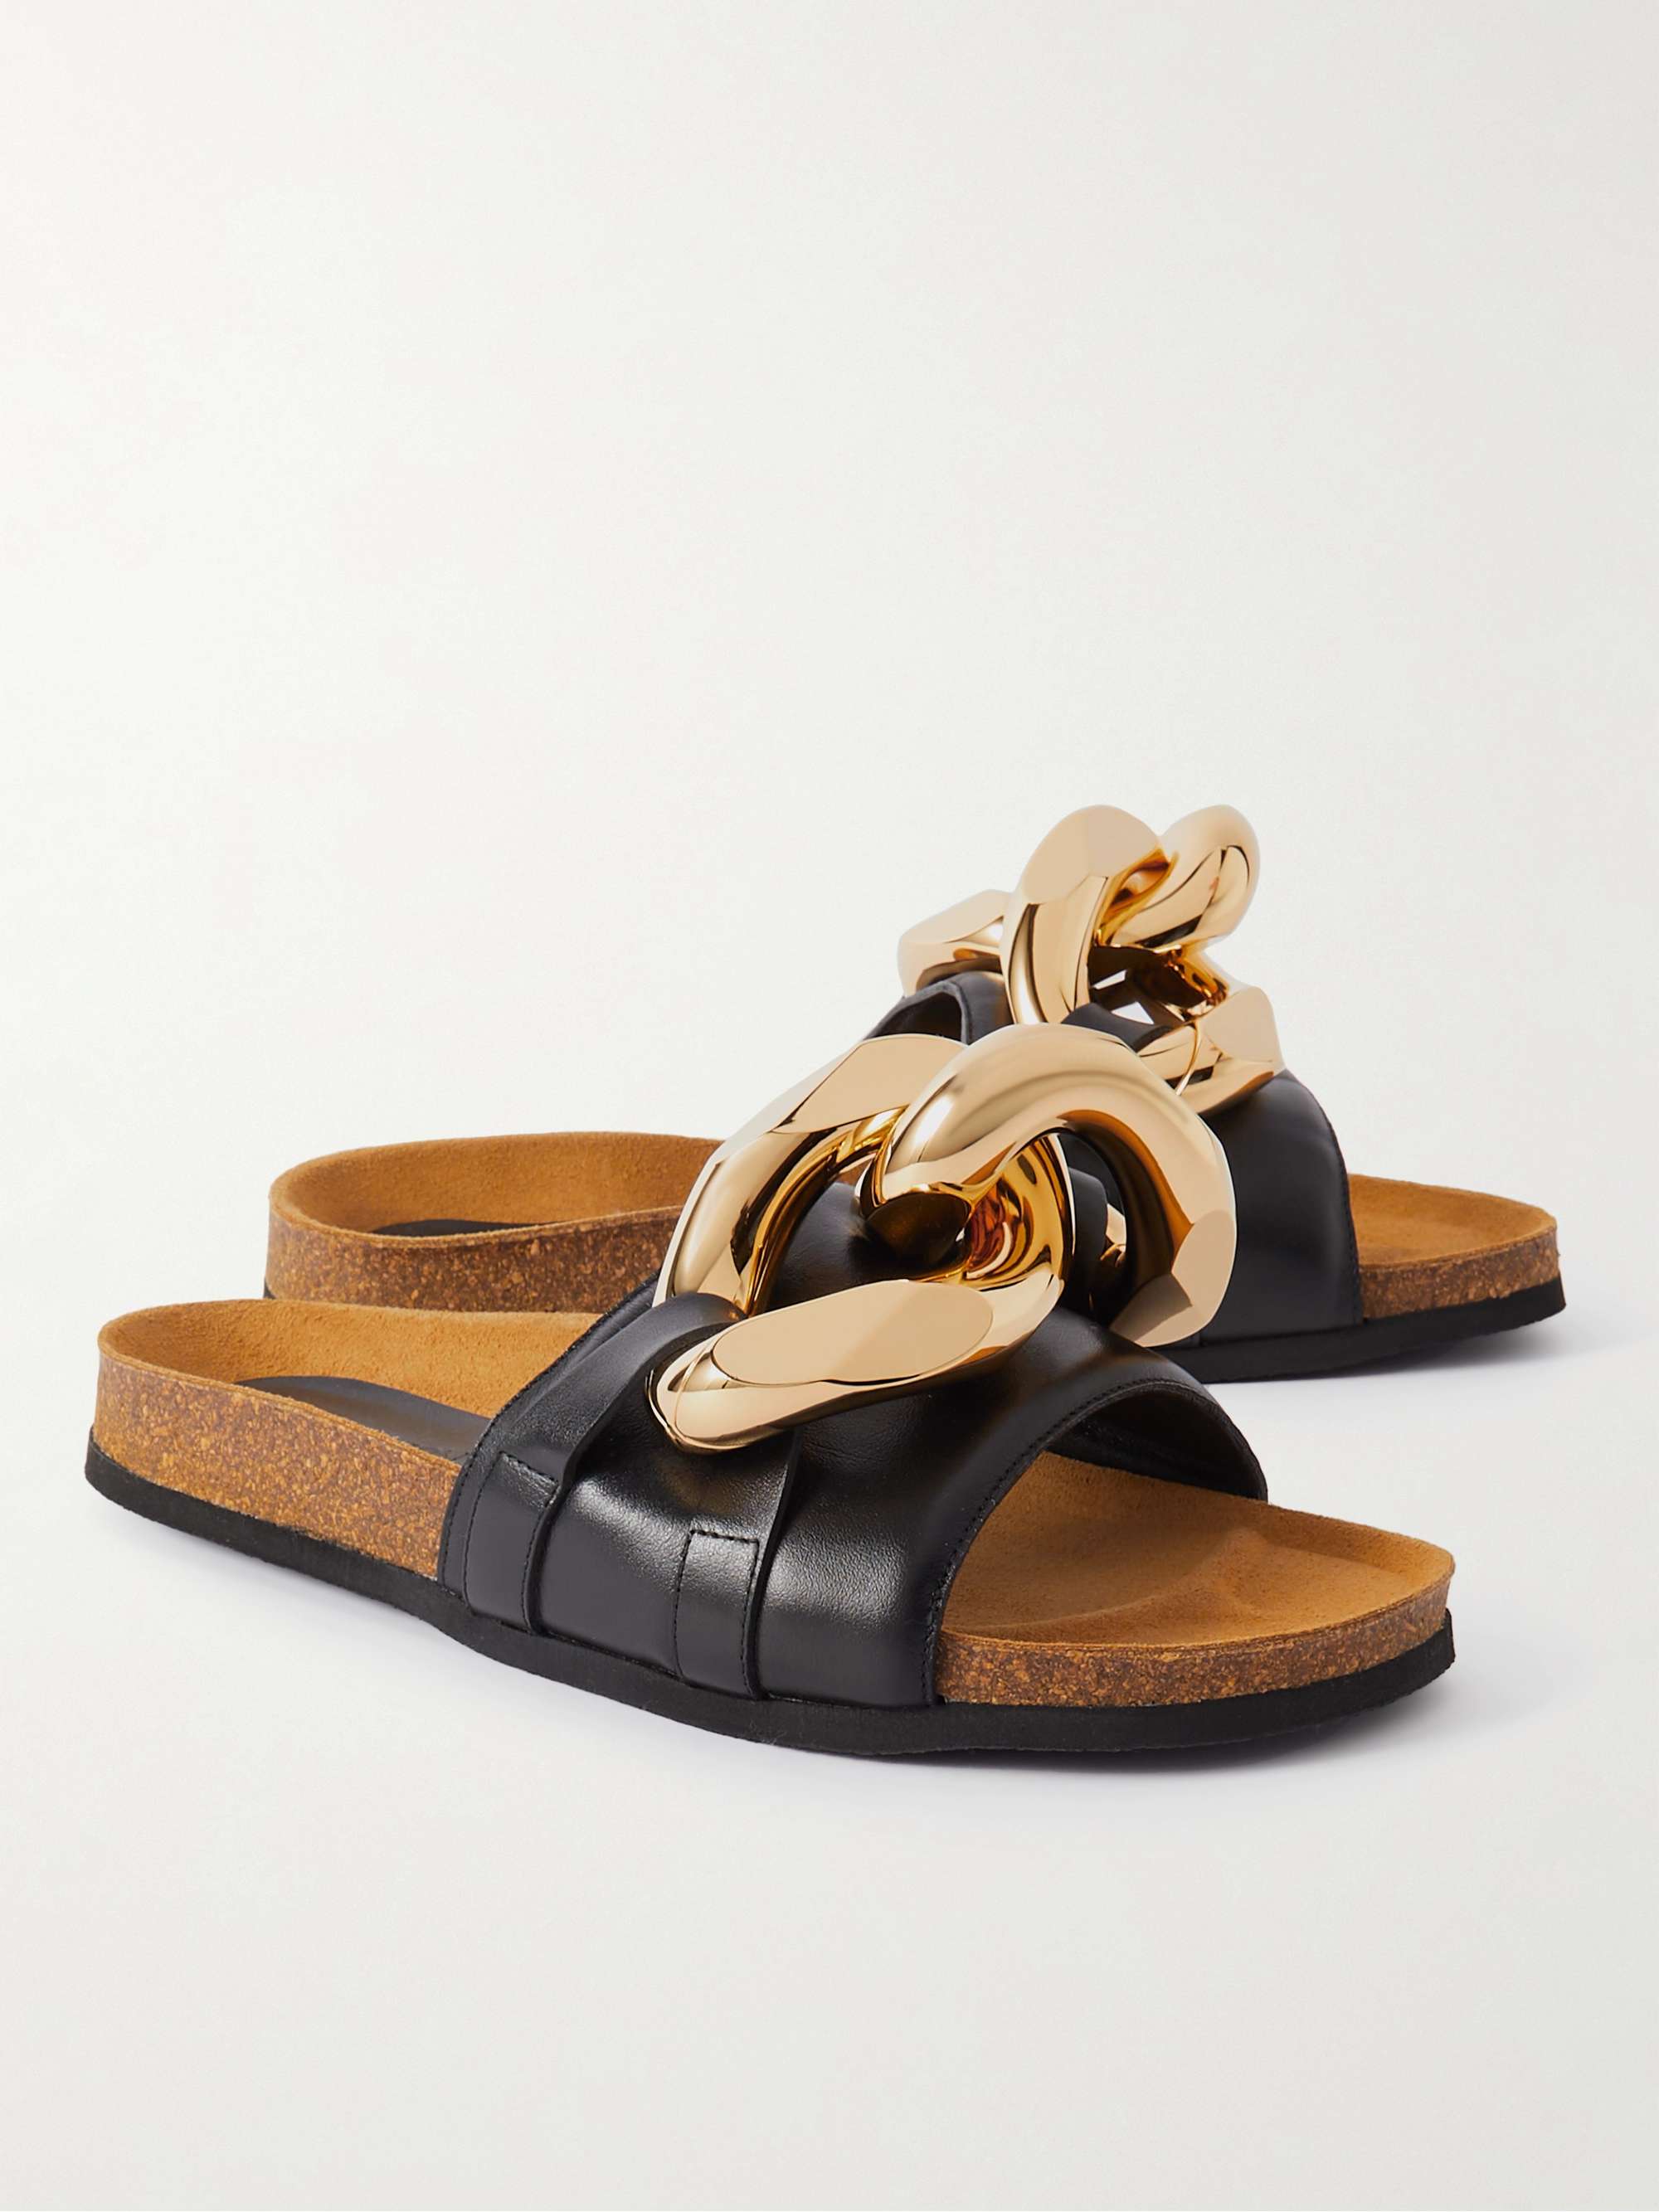 JW ANDERSON Chain-Embellished Leather Sandals